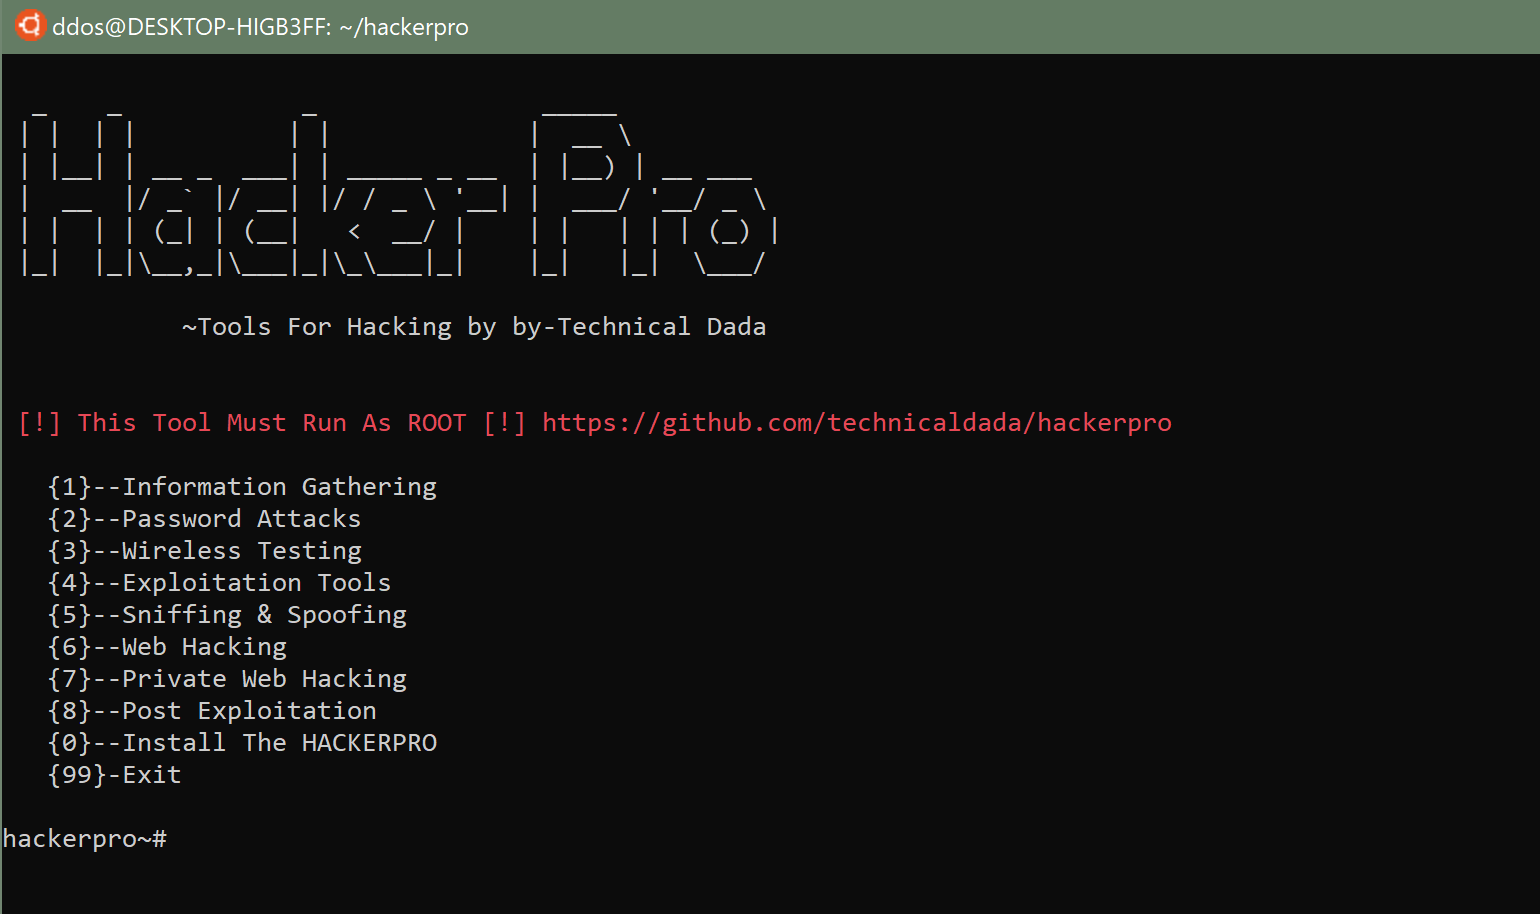 hackerpro: All in One Pentesing tool for Linux and Android